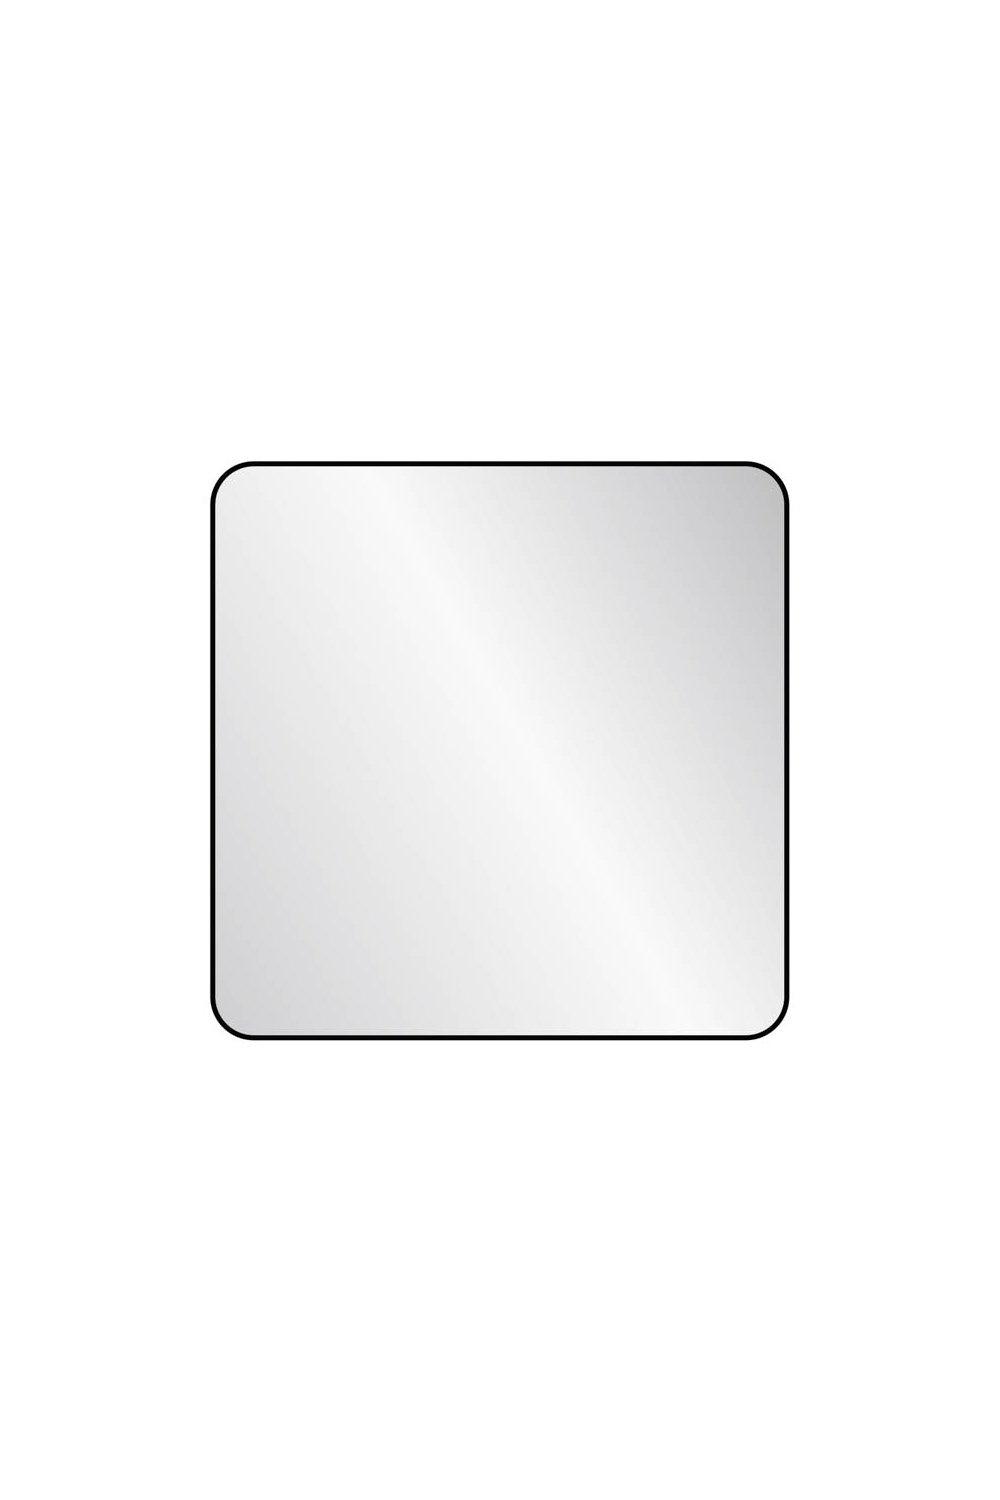 Archer Metal Square Wall Mirror Large 80Cm